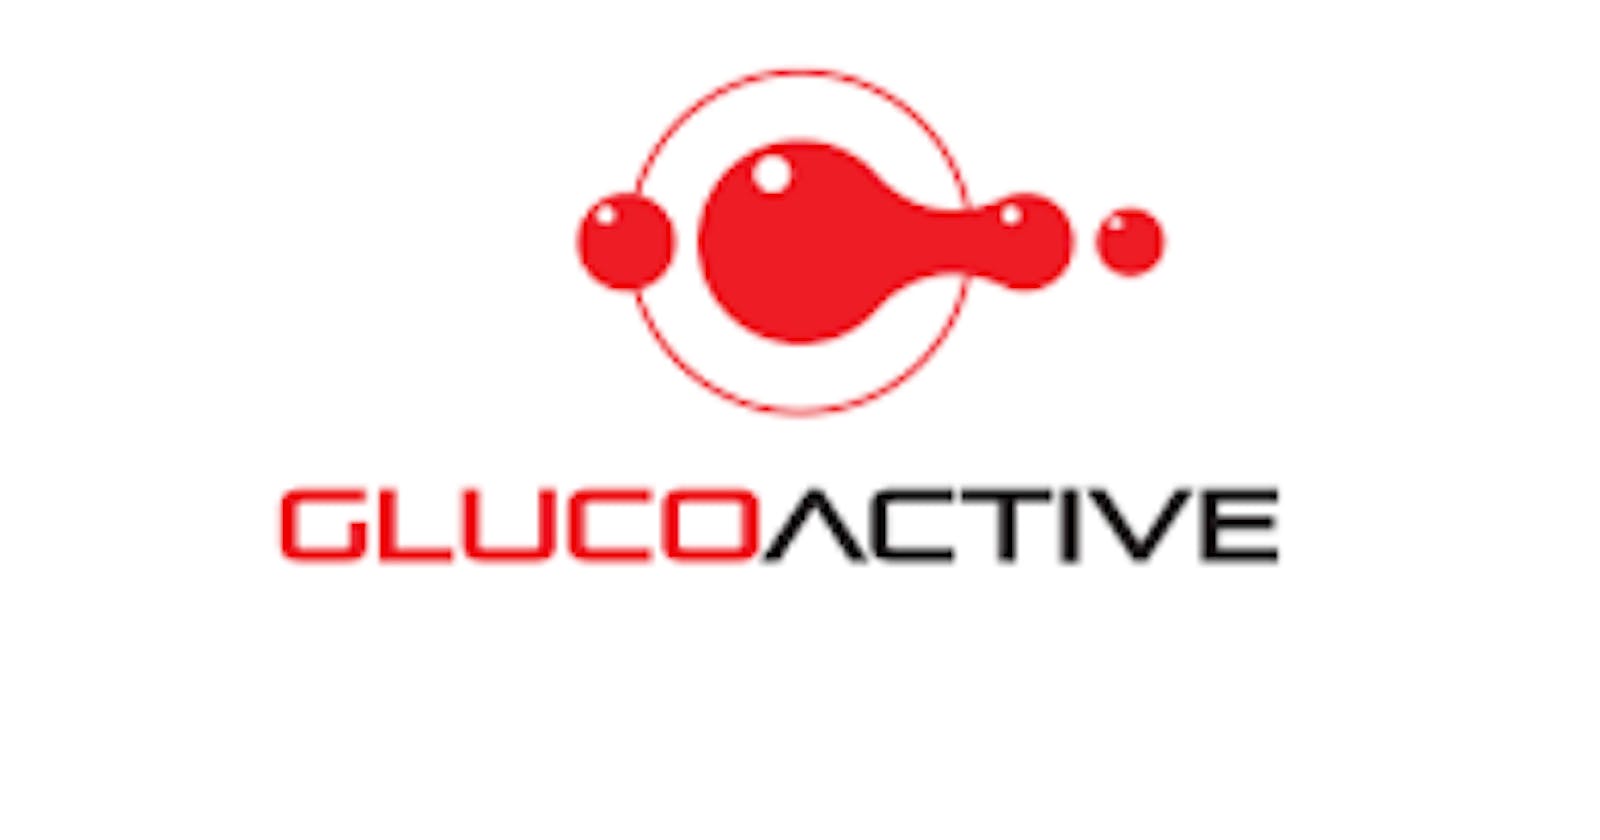 Glucoactive Herbal||Glucoactive Diabetes||Glucoactive Review